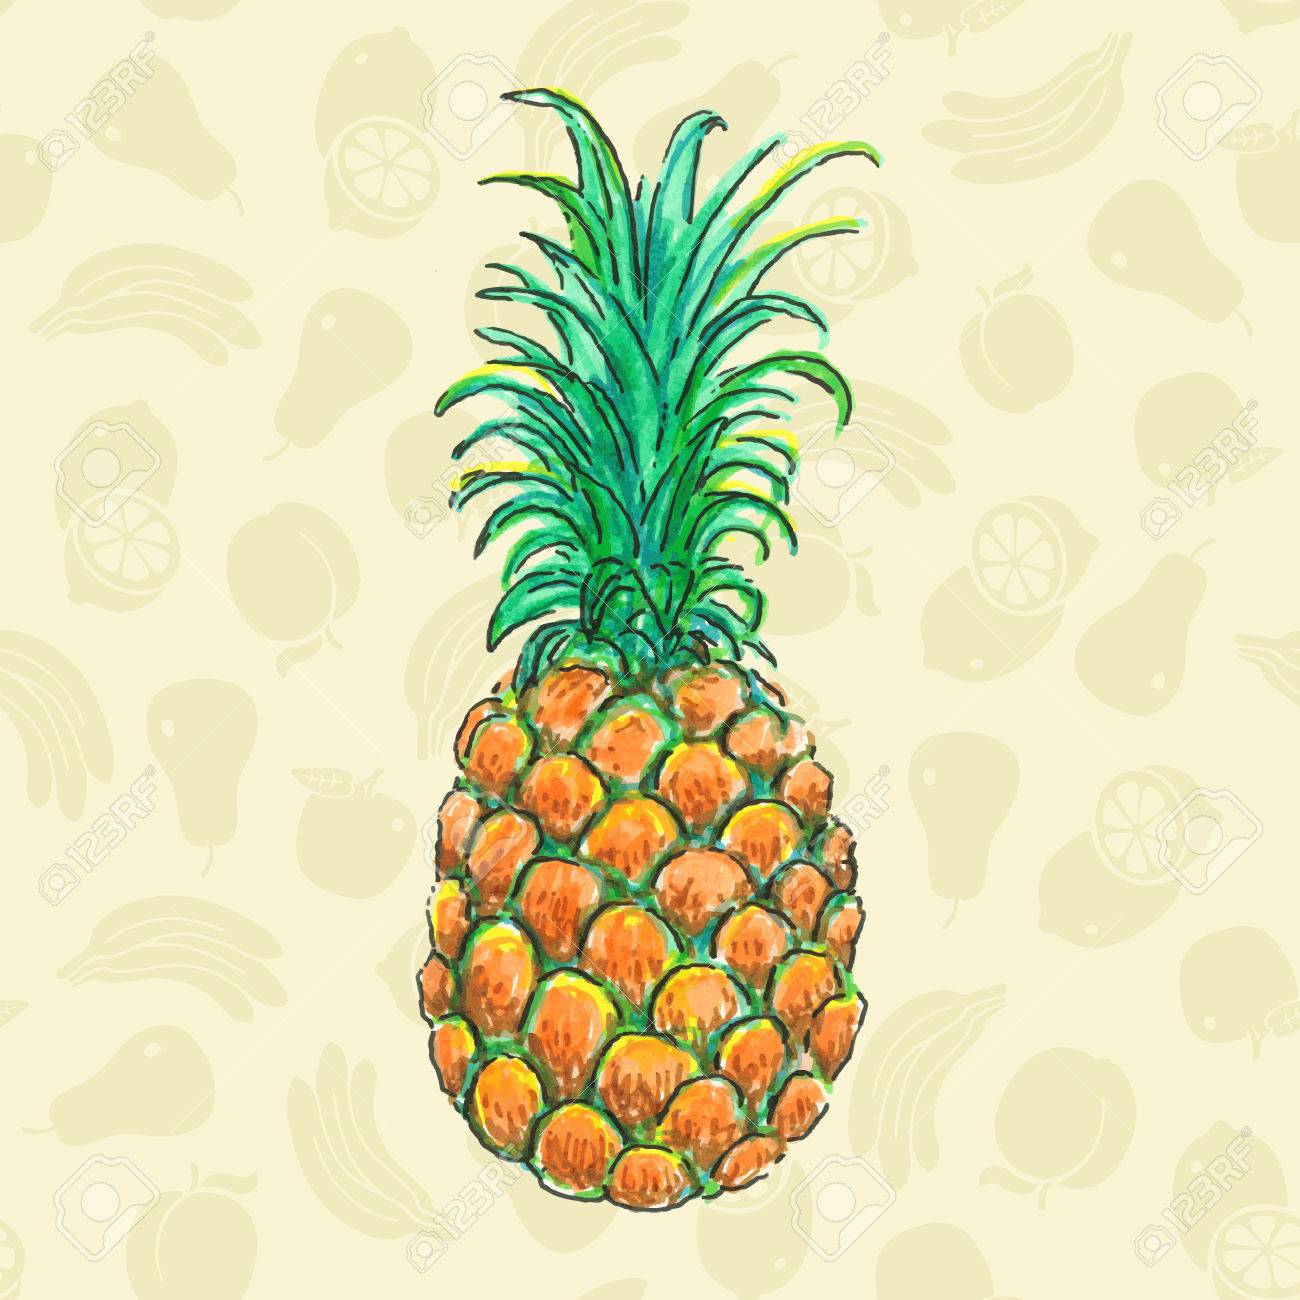 Trends For Realistic Sketch Pineapple Drawing.